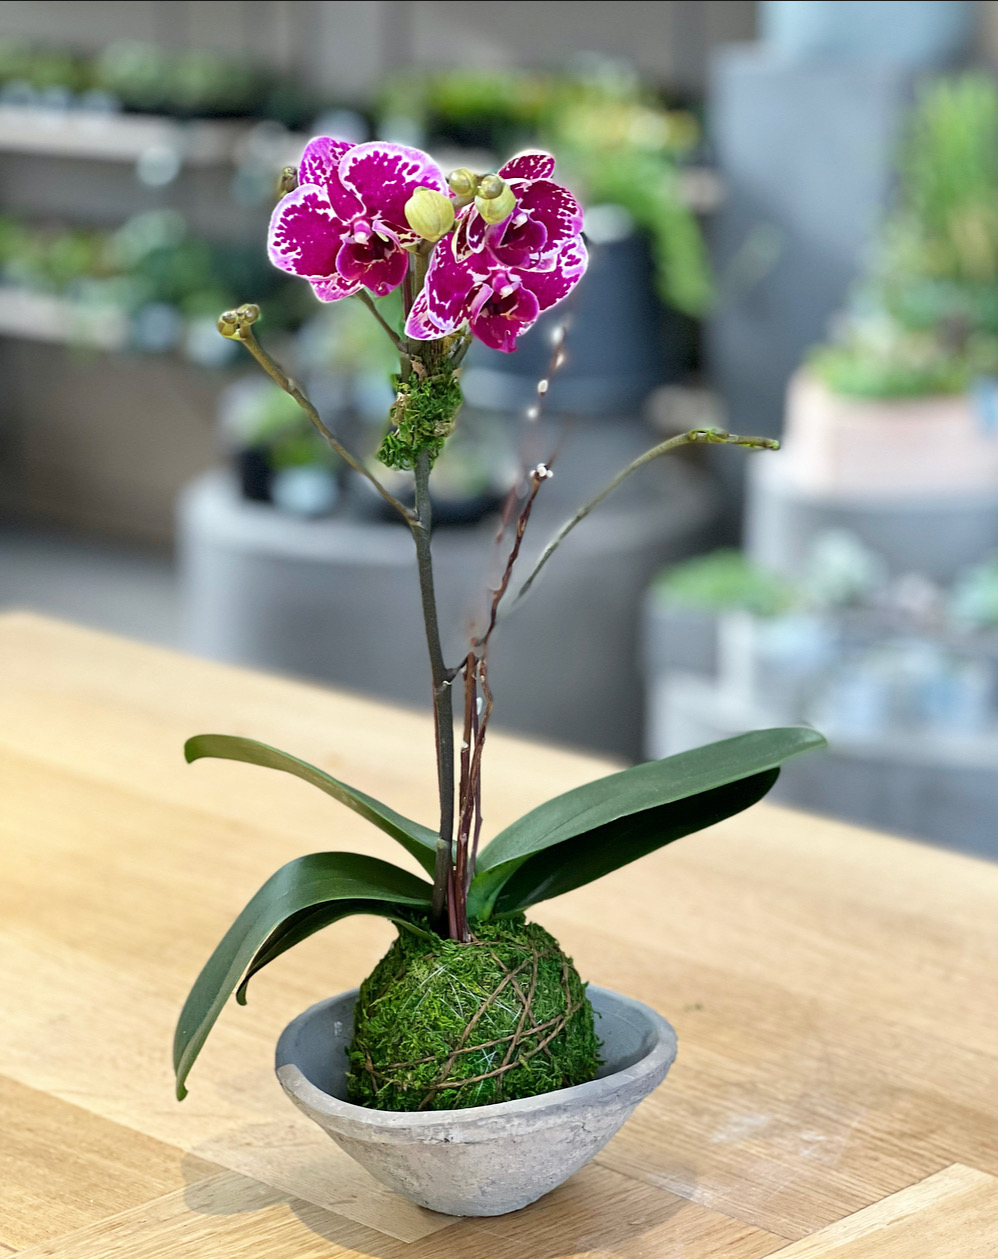 SOLD OUT: Orchid Kokedama Workshop - Sun River Gardens